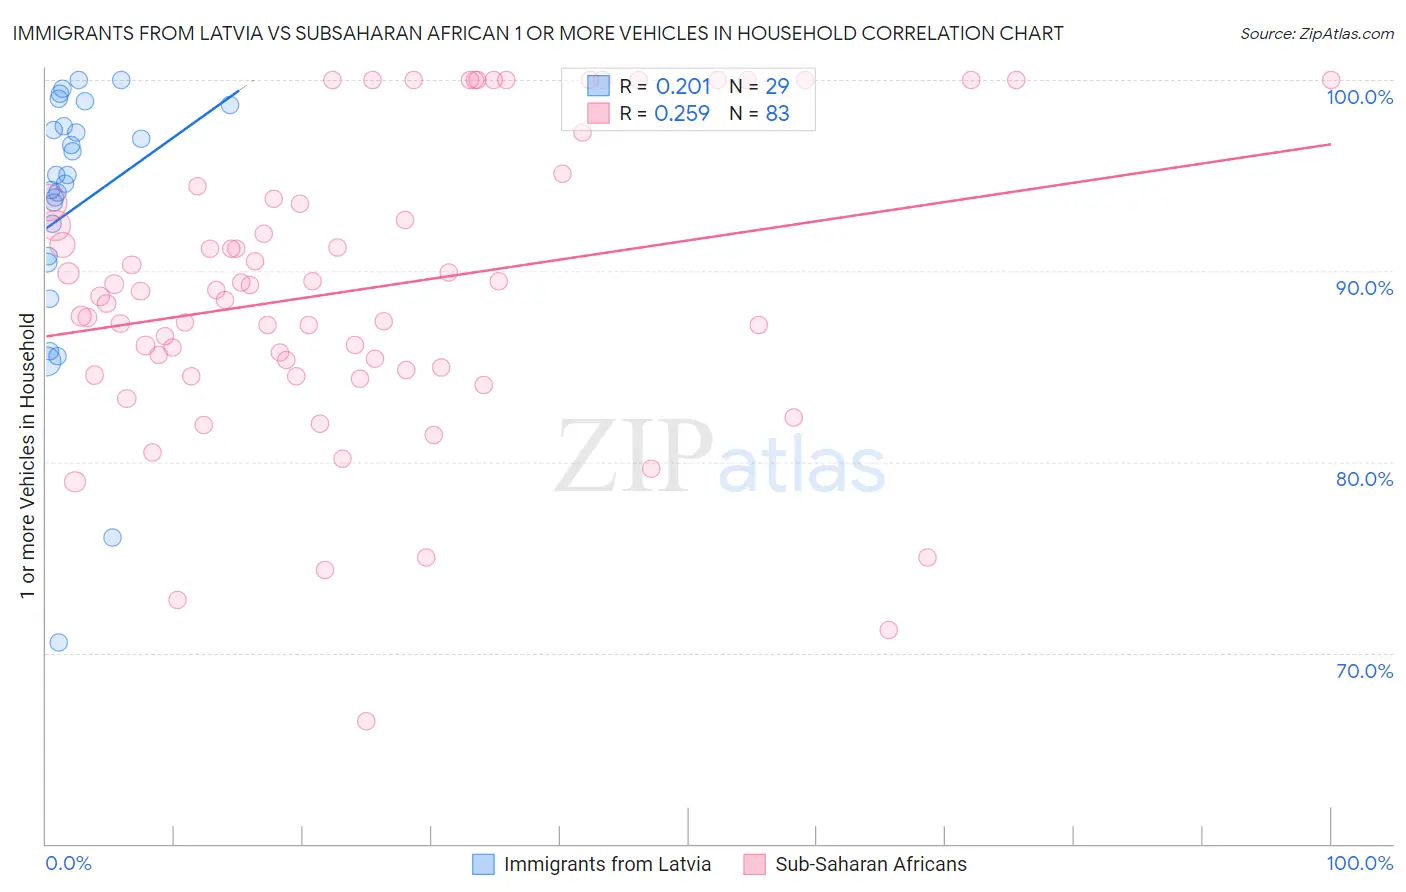 Immigrants from Latvia vs Subsaharan African 1 or more Vehicles in Household